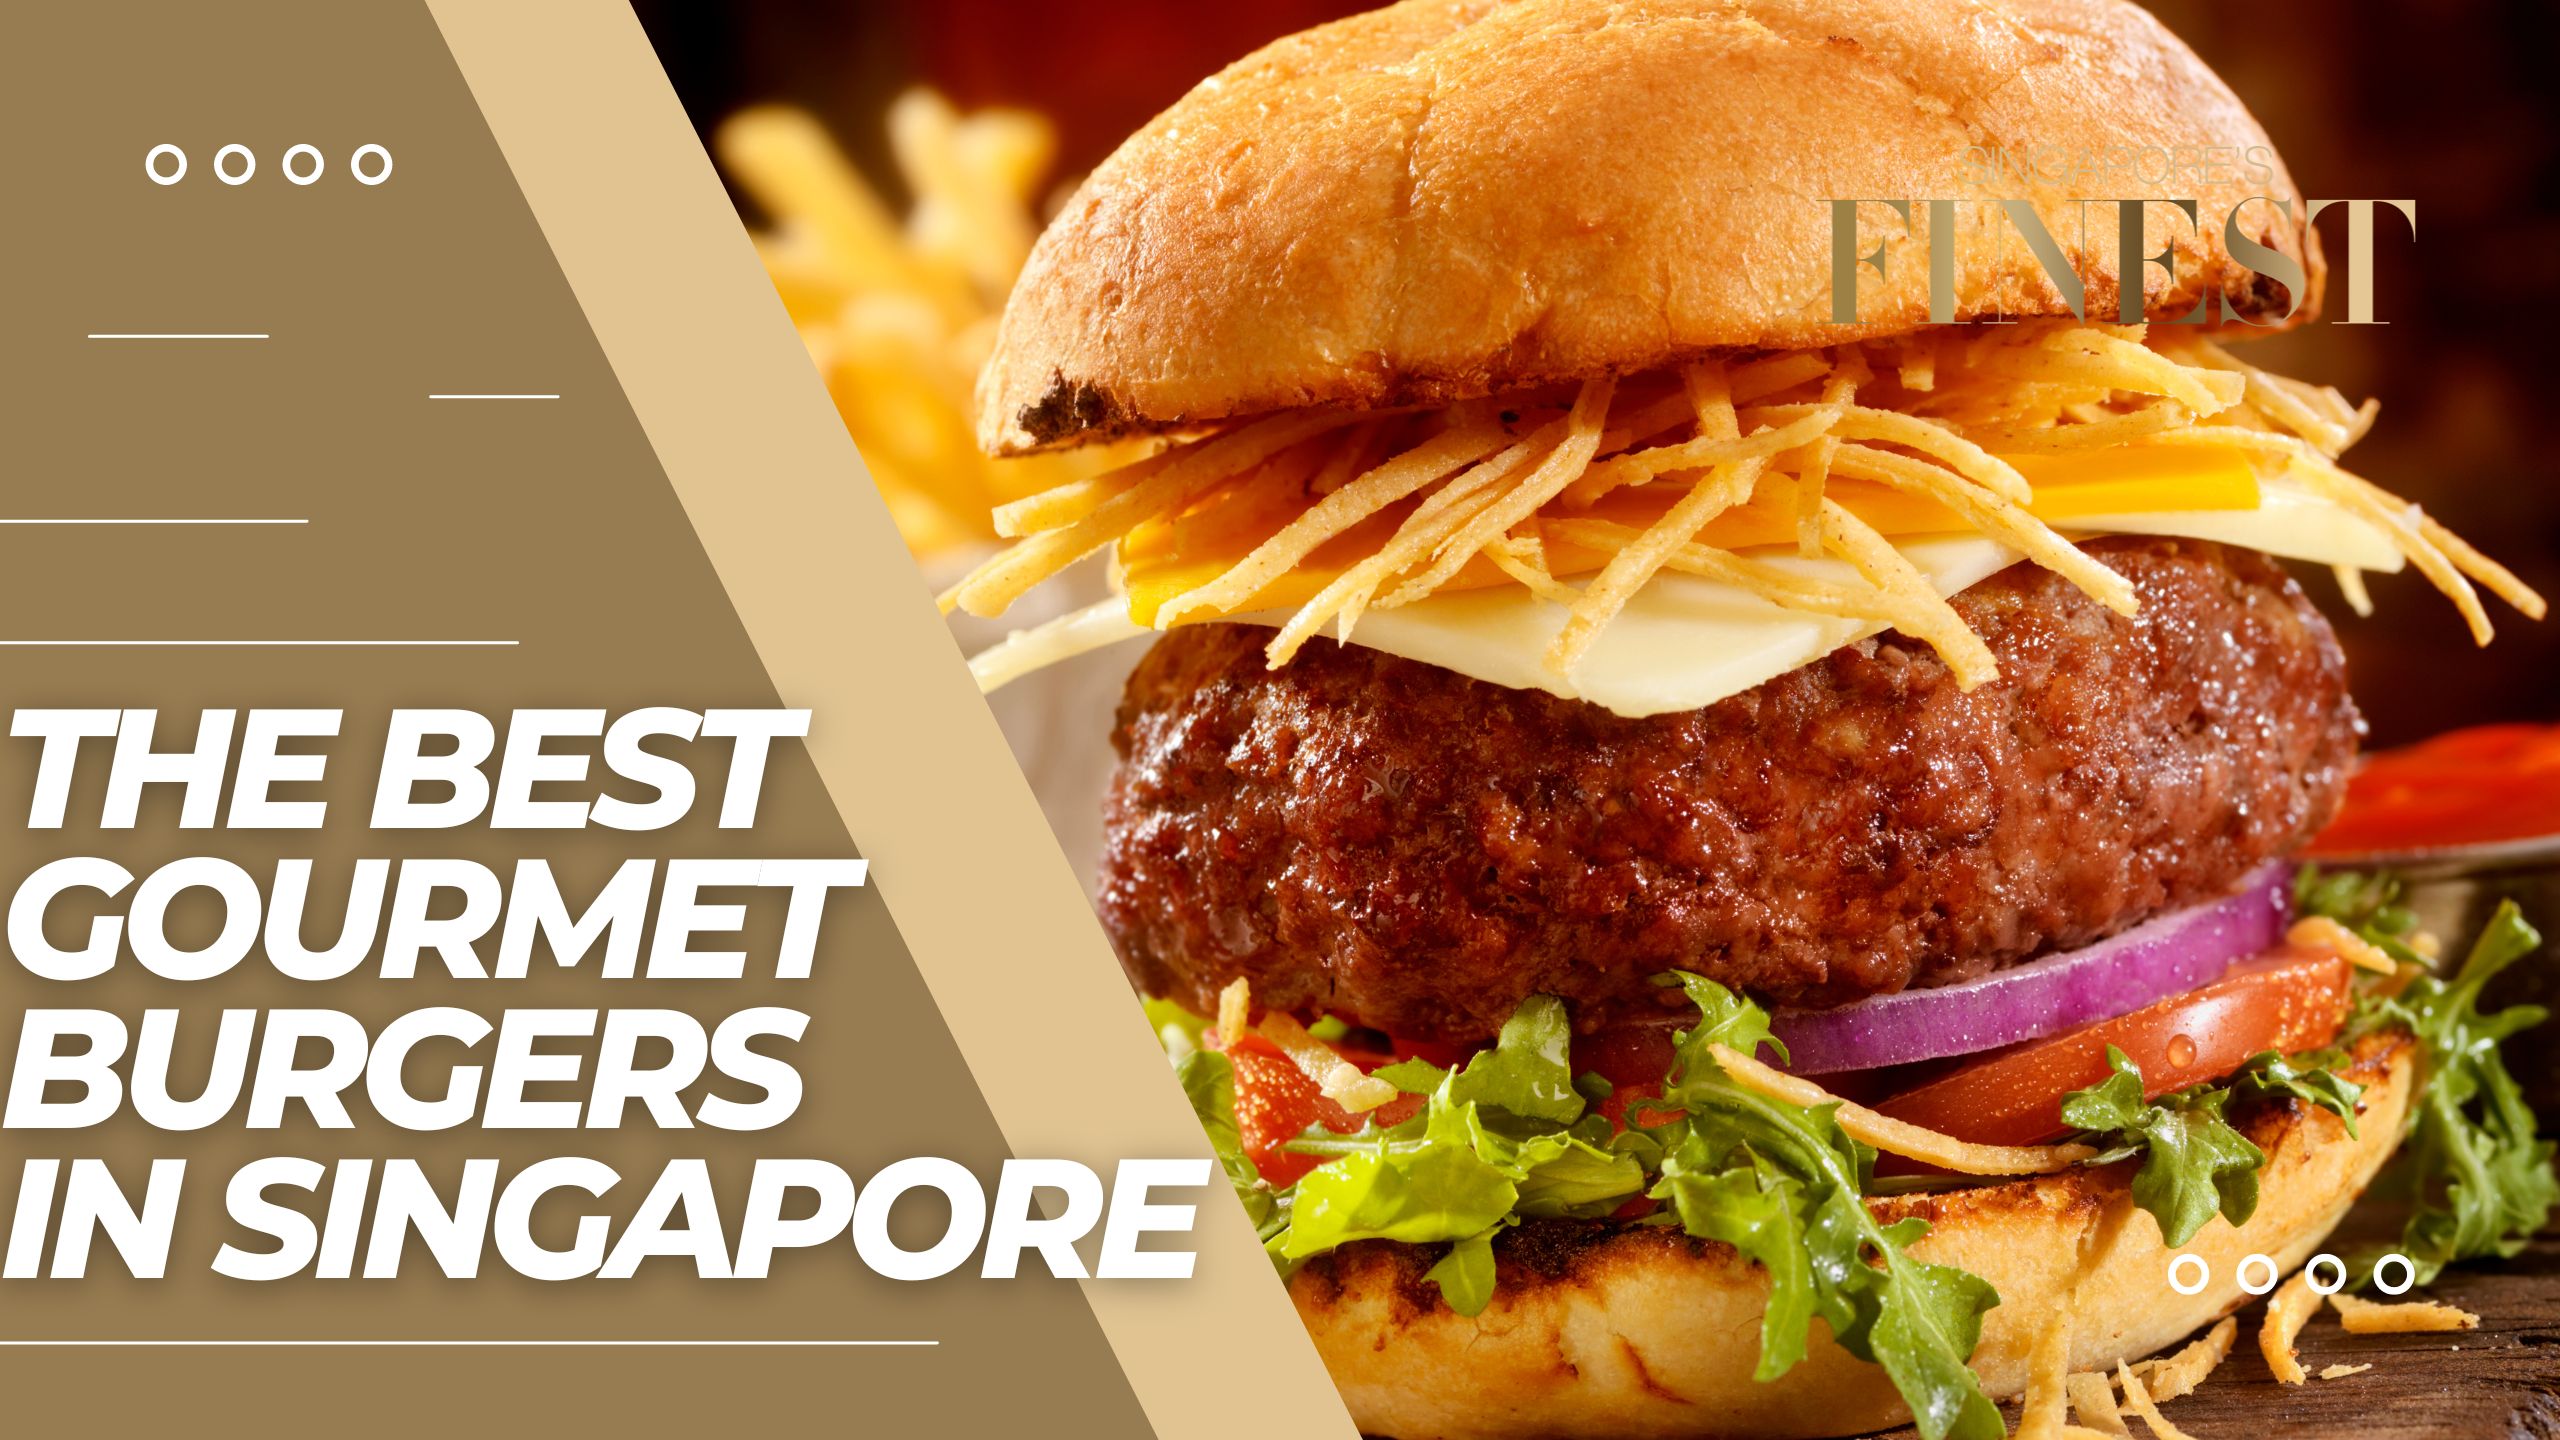 The Finest Gourmet Burgers in Singapore